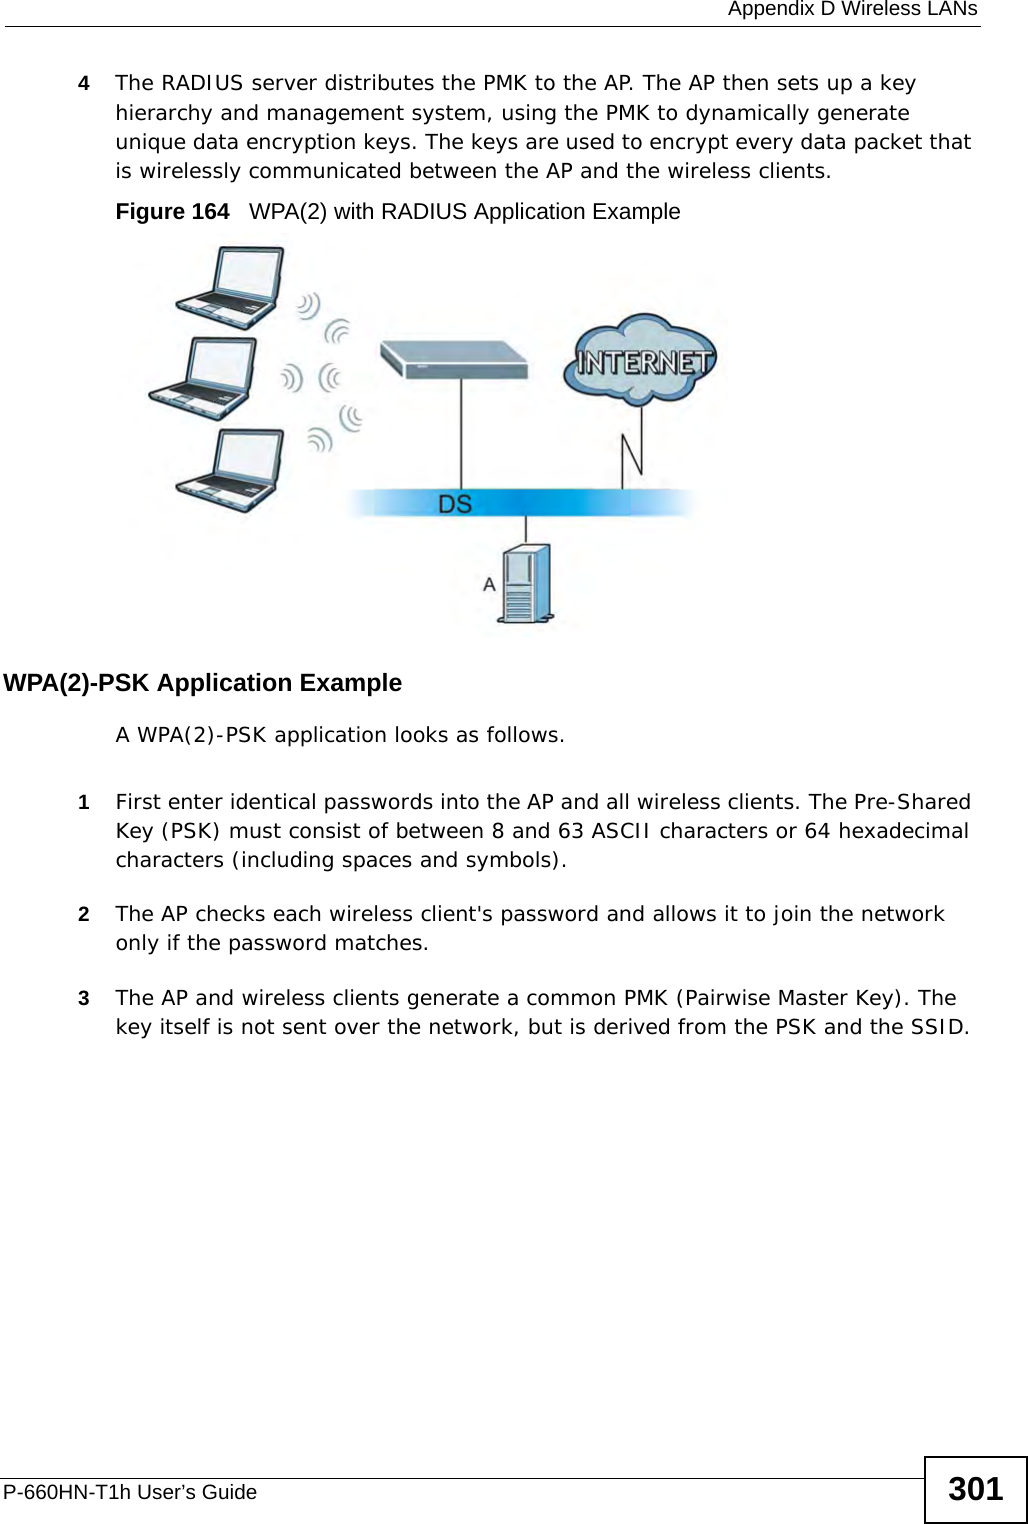  Appendix D Wireless LANsP-660HN-T1h User’s Guide 3014The RADIUS server distributes the PMK to the AP. The AP then sets up a key hierarchy and management system, using the PMK to dynamically generate unique data encryption keys. The keys are used to encrypt every data packet that is wirelessly communicated between the AP and the wireless clients.Figure 164   WPA(2) with RADIUS Application ExampleWPA(2)-PSK Application ExampleA WPA(2)-PSK application looks as follows.1First enter identical passwords into the AP and all wireless clients. The Pre-Shared Key (PSK) must consist of between 8 and 63 ASCII characters or 64 hexadecimal characters (including spaces and symbols).2The AP checks each wireless client&apos;s password and allows it to join the network only if the password matches.3The AP and wireless clients generate a common PMK (Pairwise Master Key). The key itself is not sent over the network, but is derived from the PSK and the SSID. 